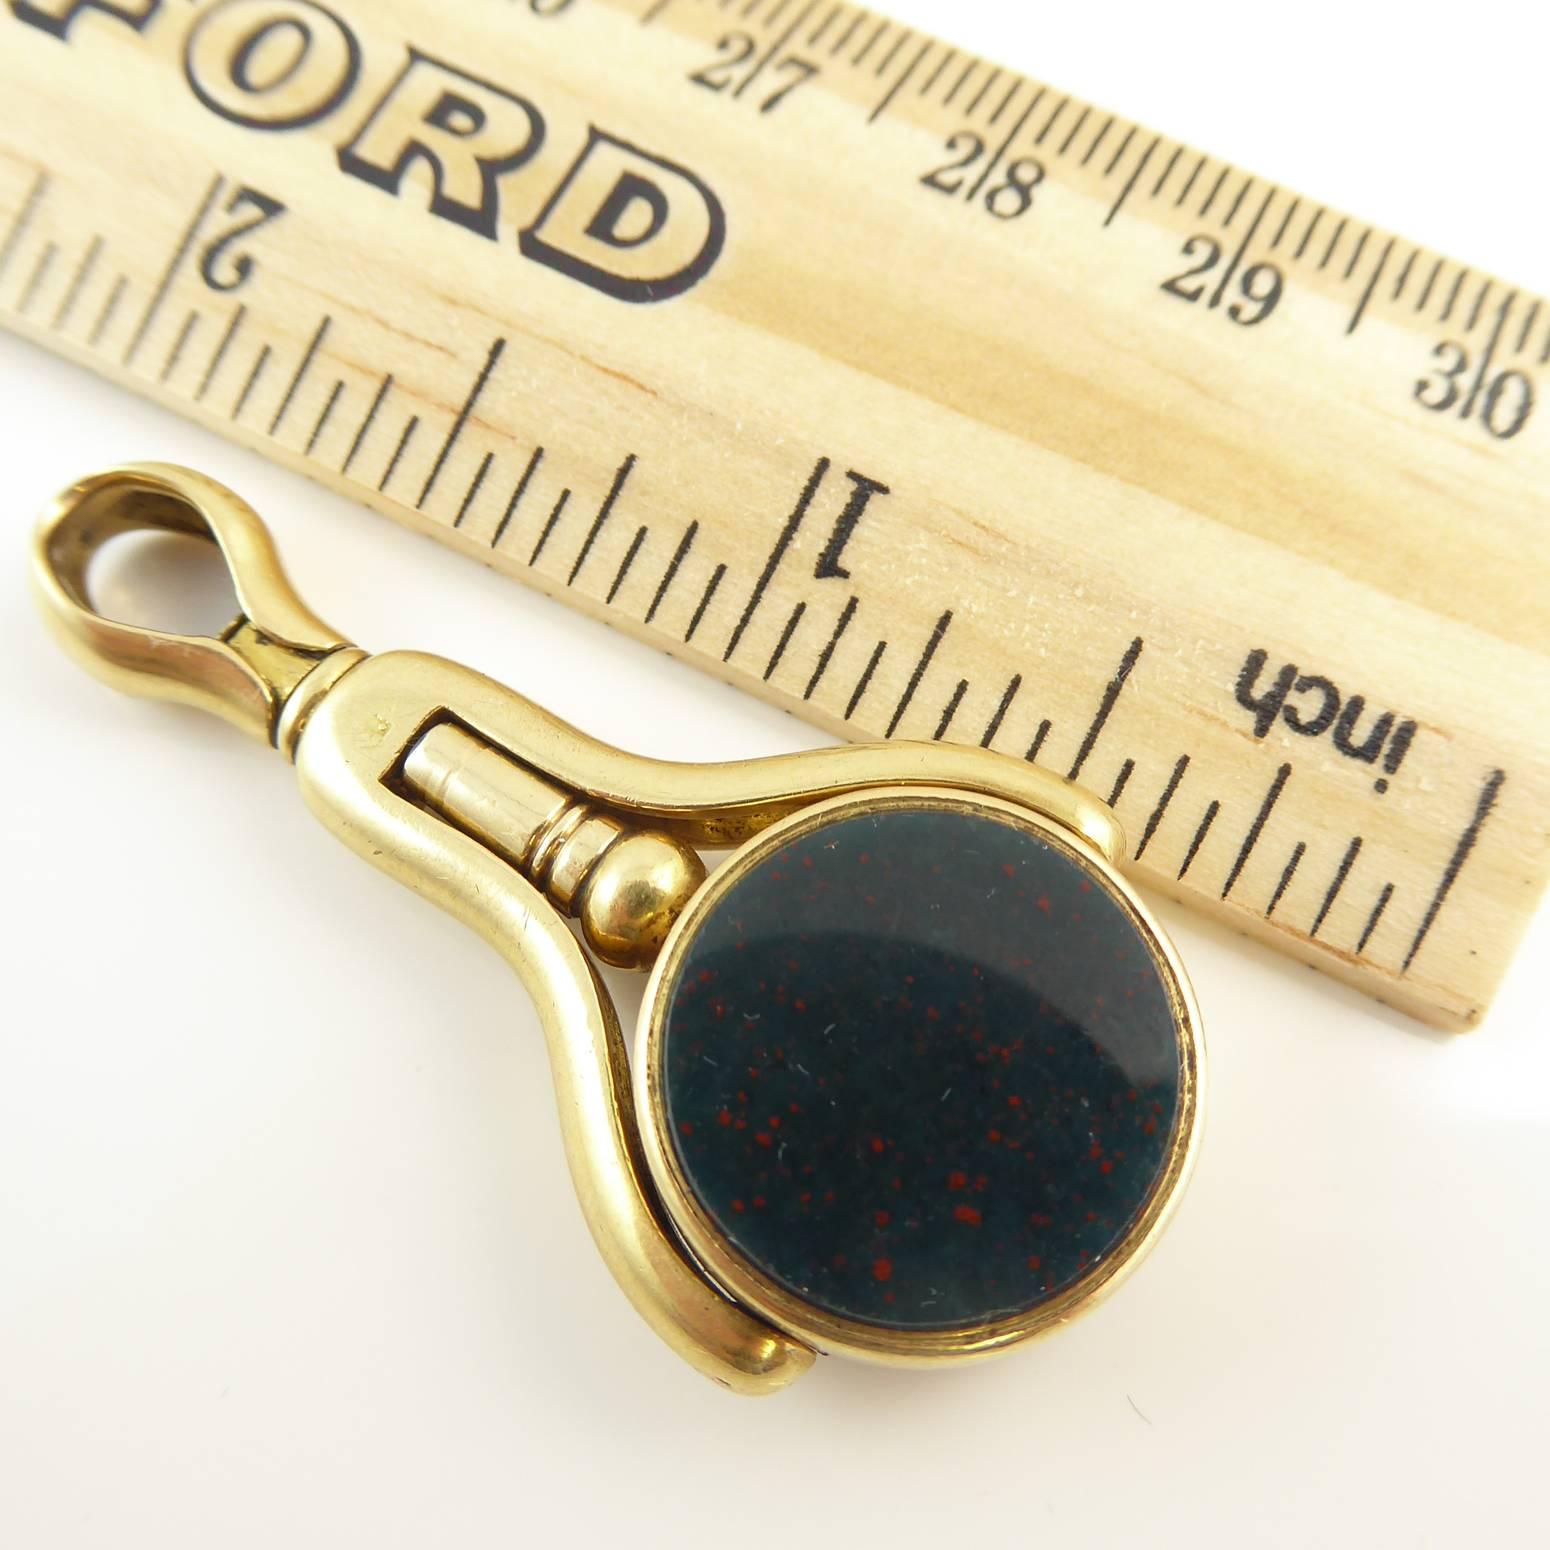 pocket watch with a silver chain and a bloodstone